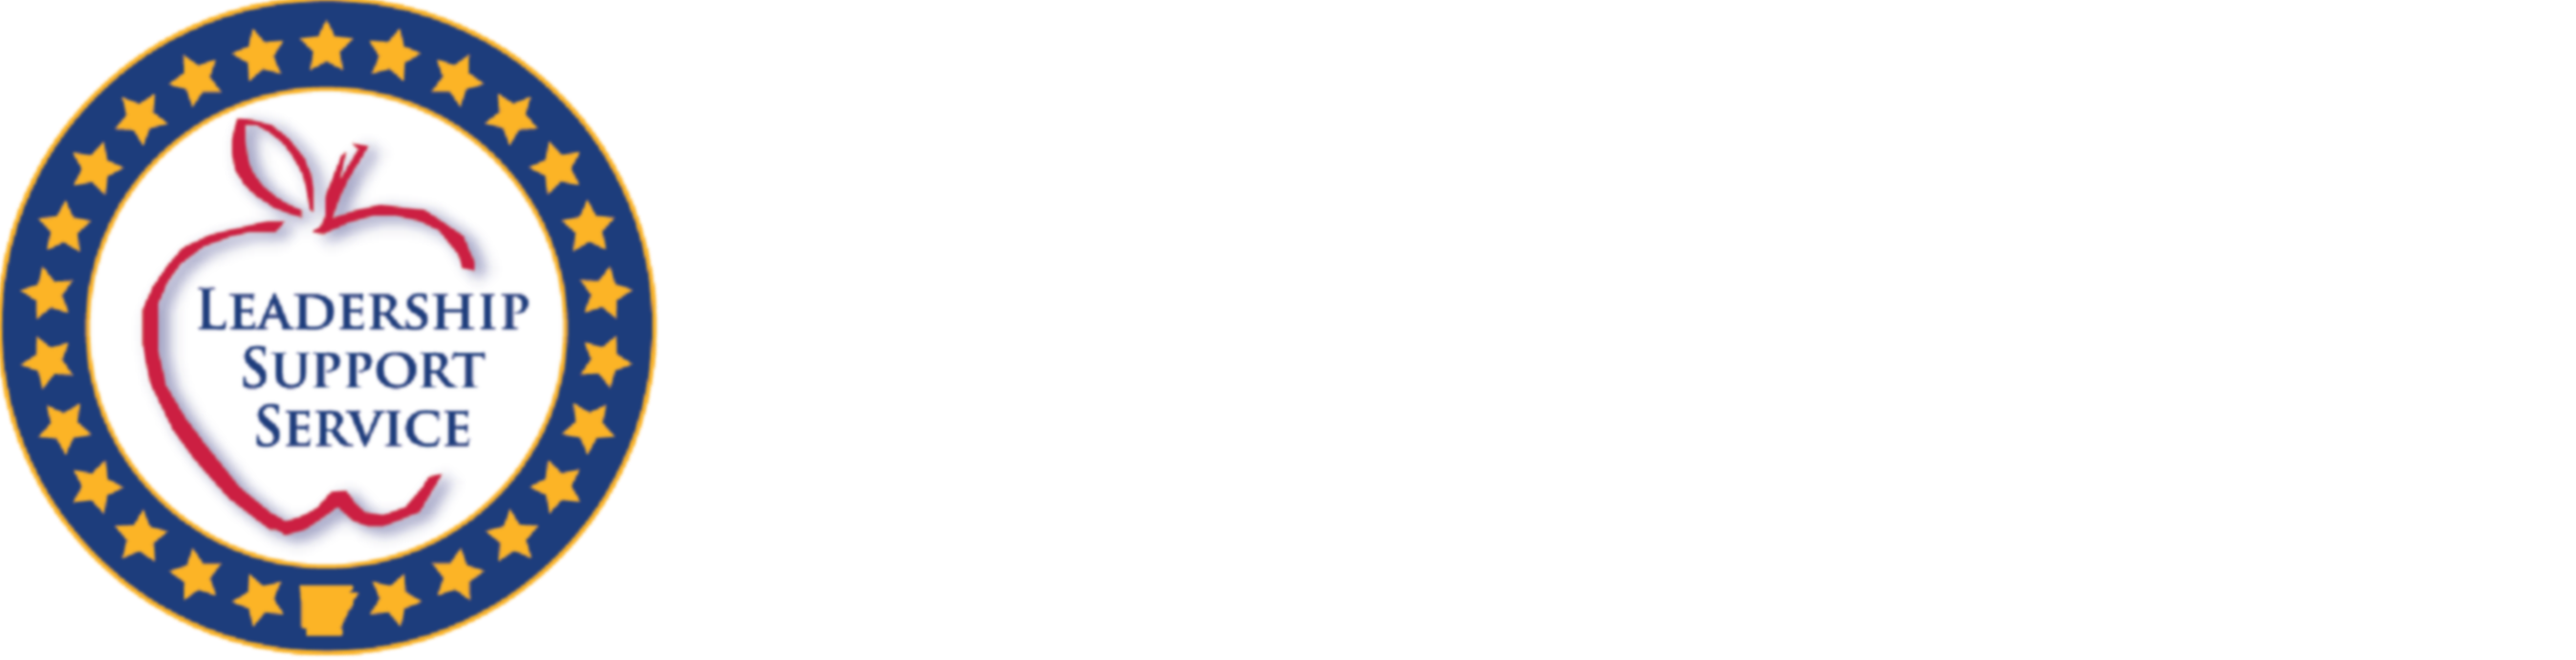 State Required Information Link